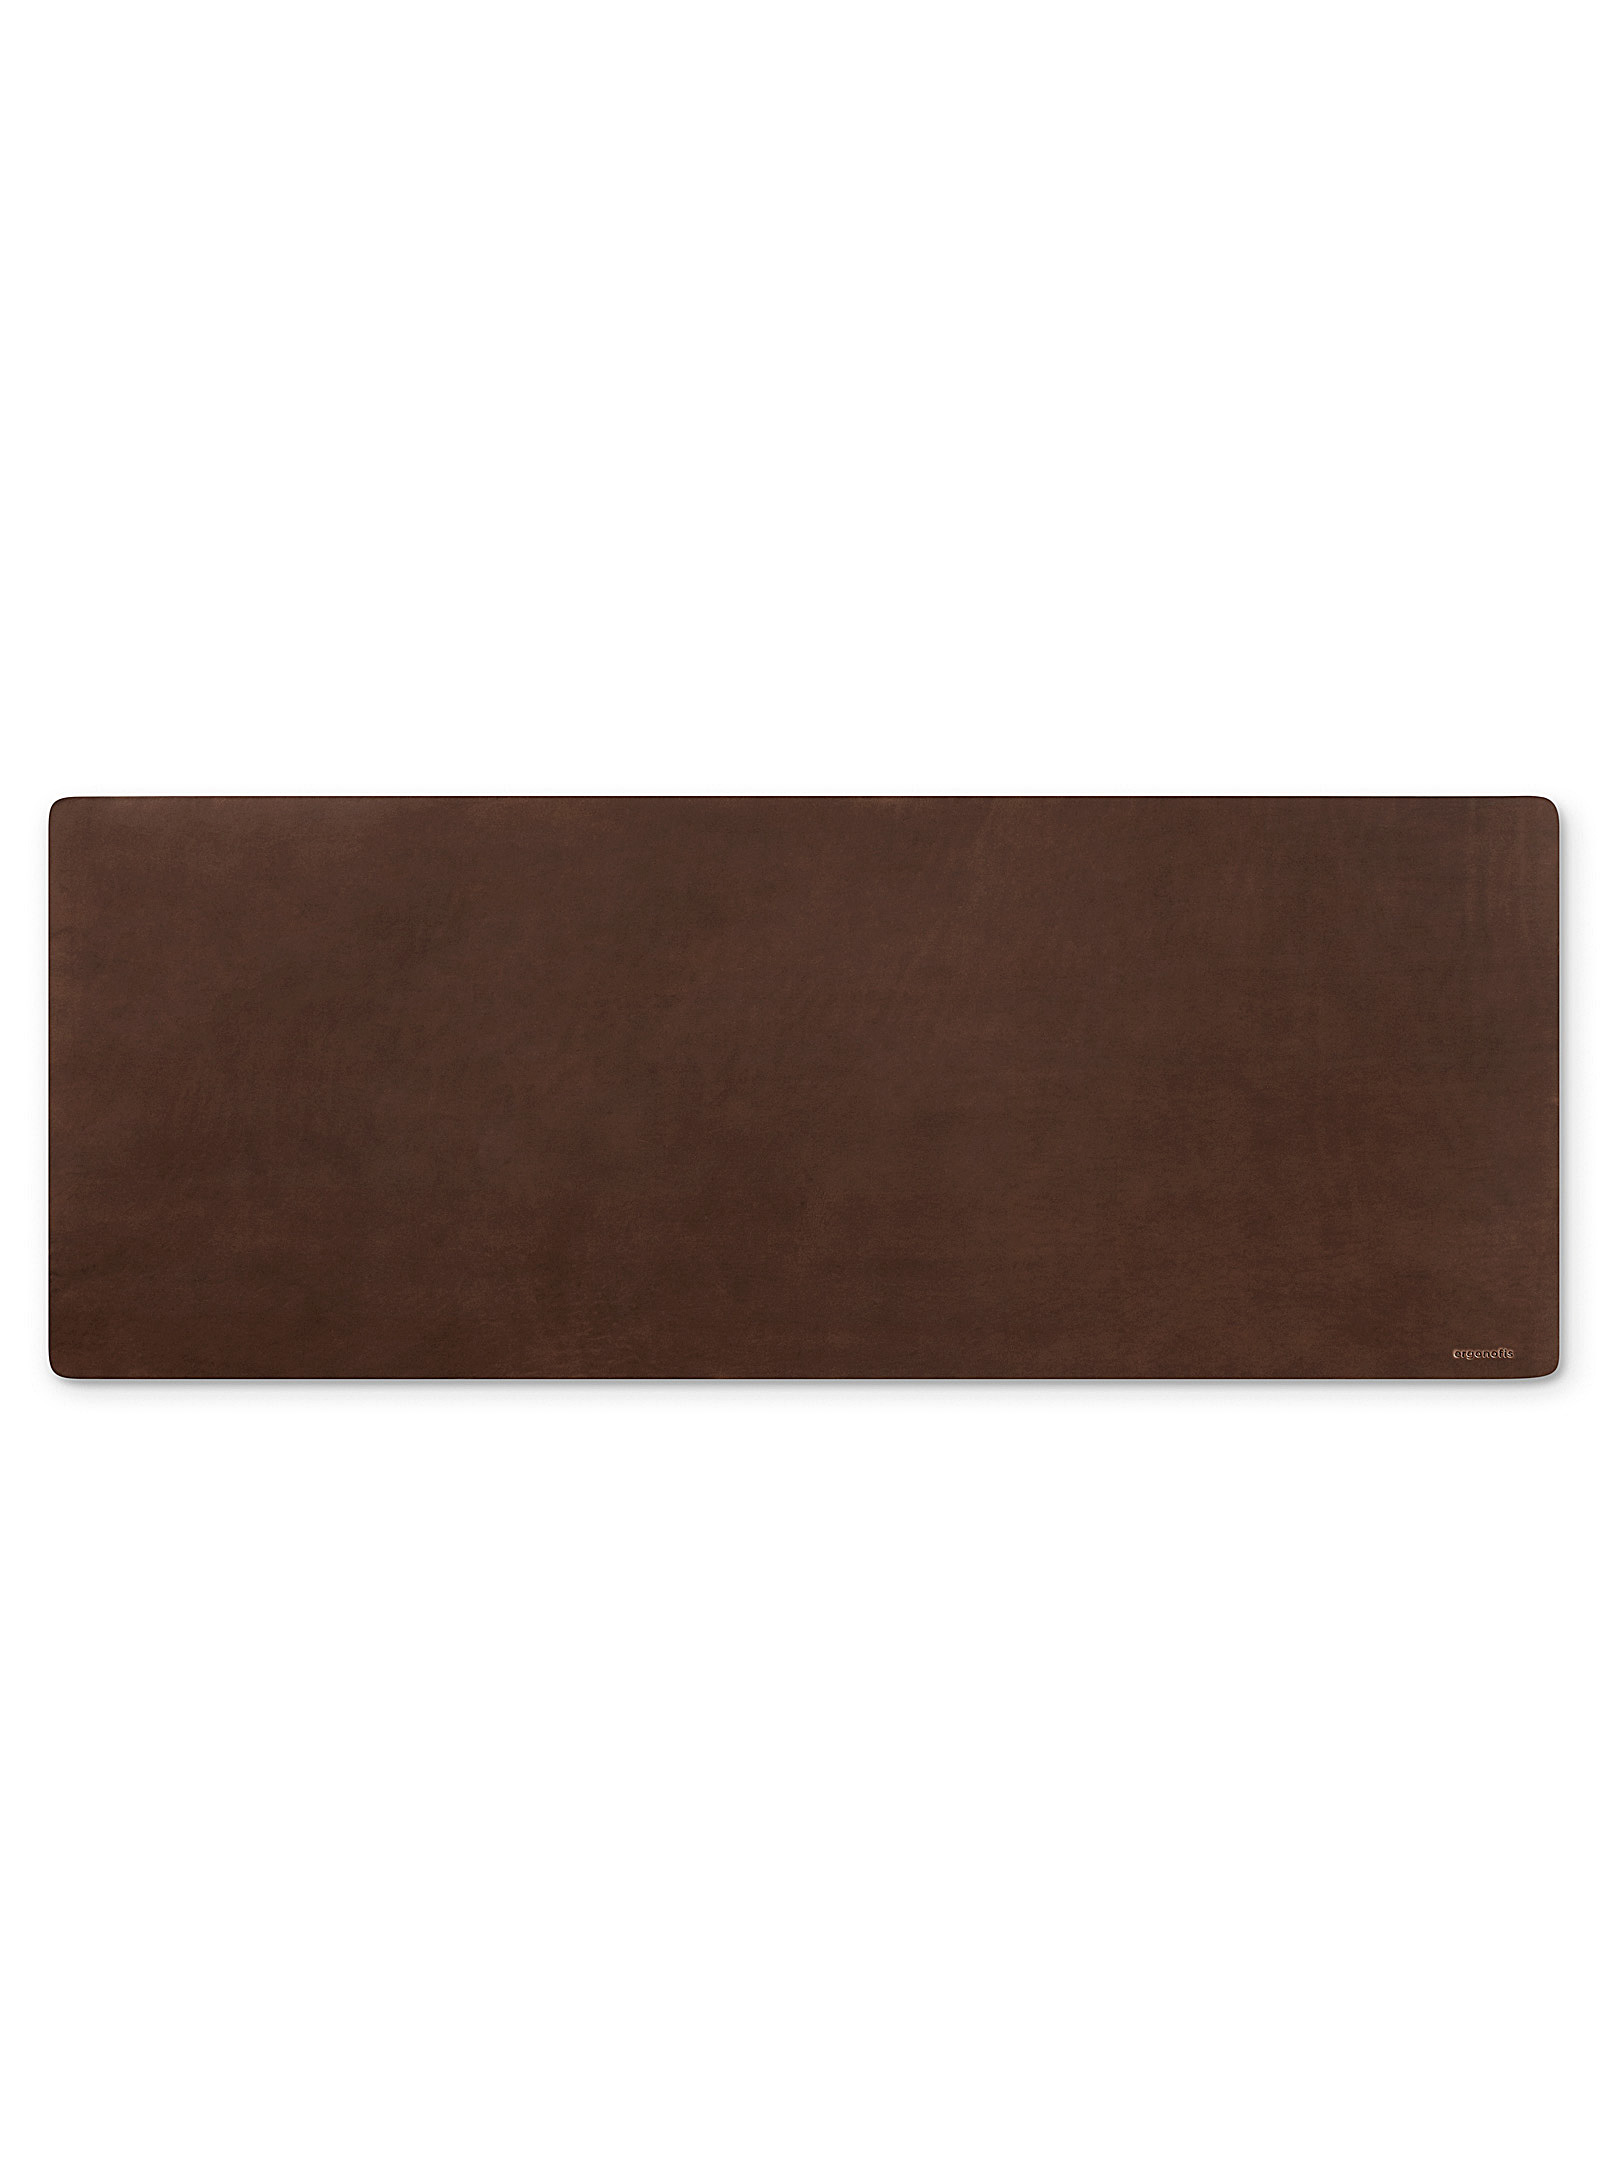 Ergonofis Leather Desk Pad In Brown